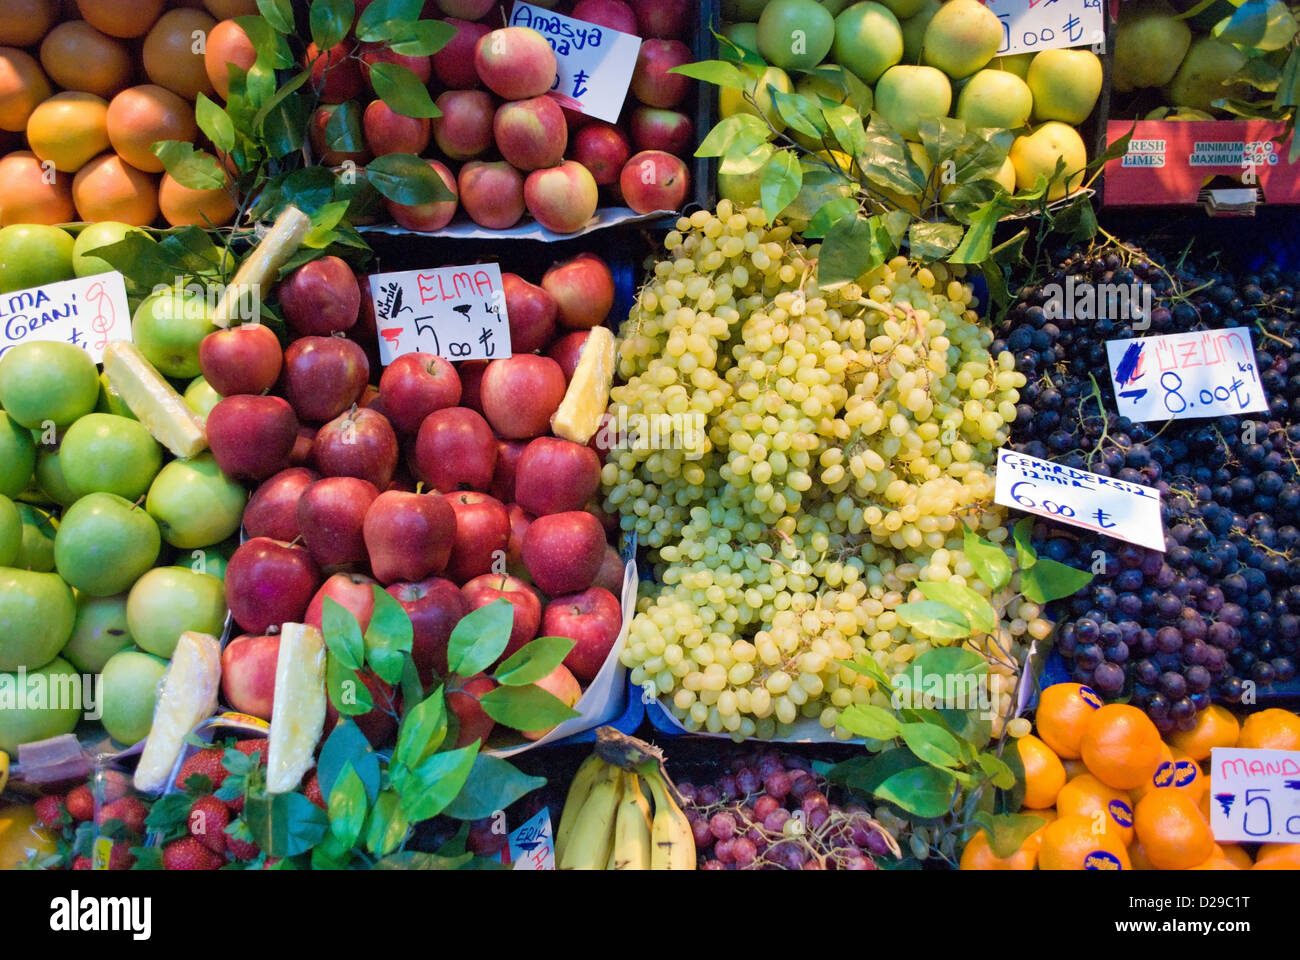 Fruit on display in Istanbul market Stock Photo